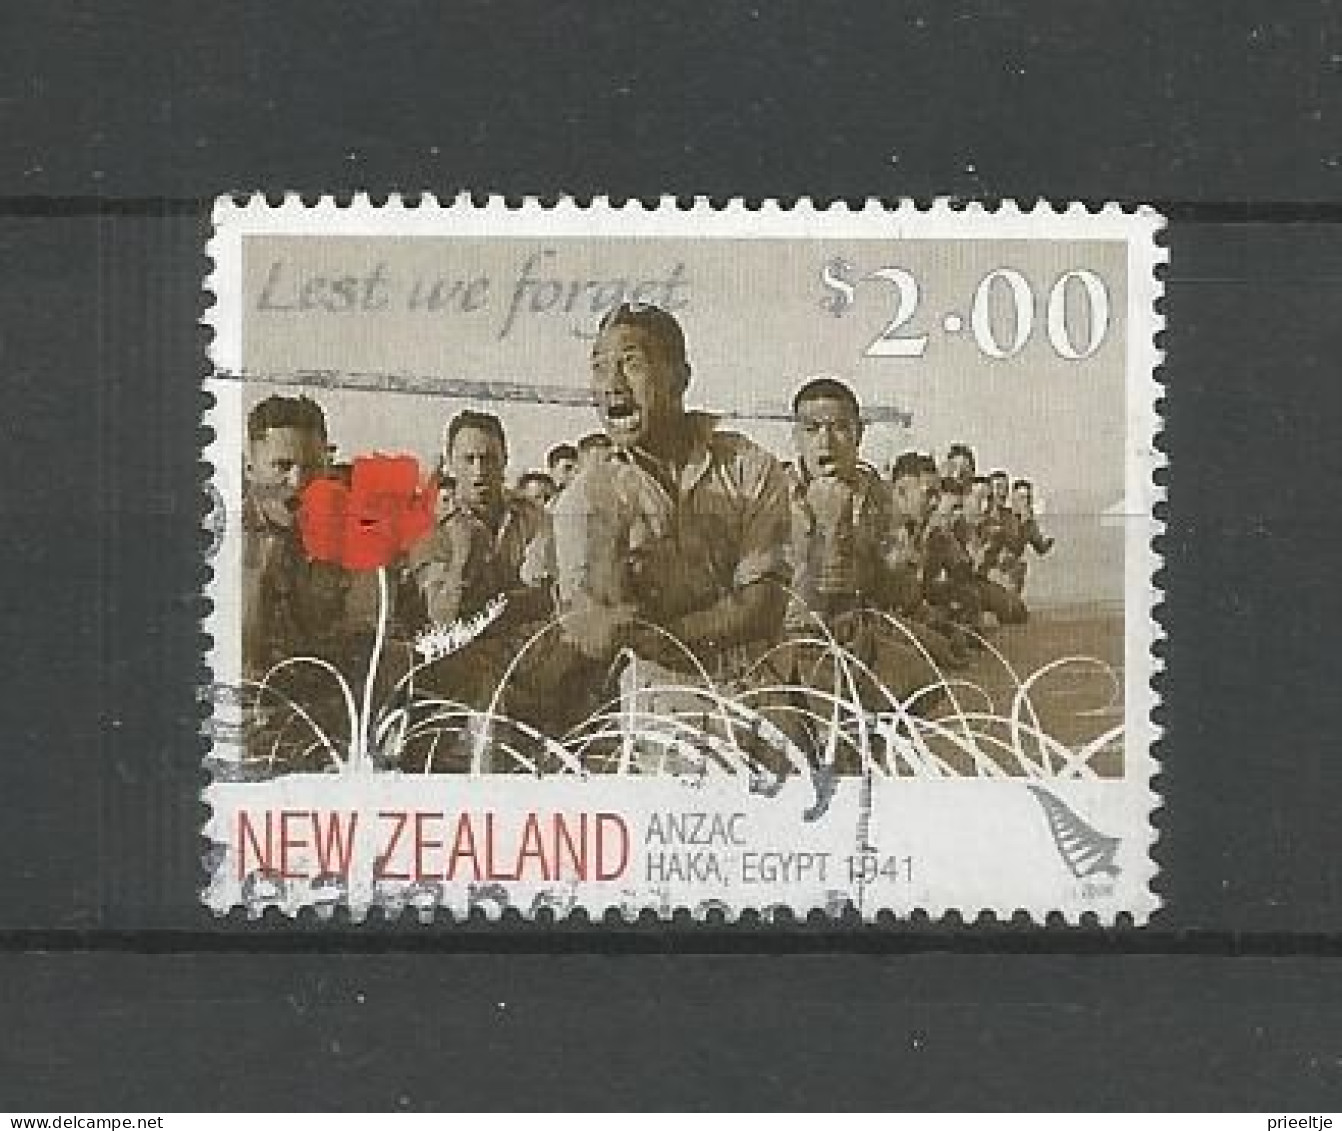 New Zealand 2008 Lest We Forget Y.T. 2396 (0) - Usati